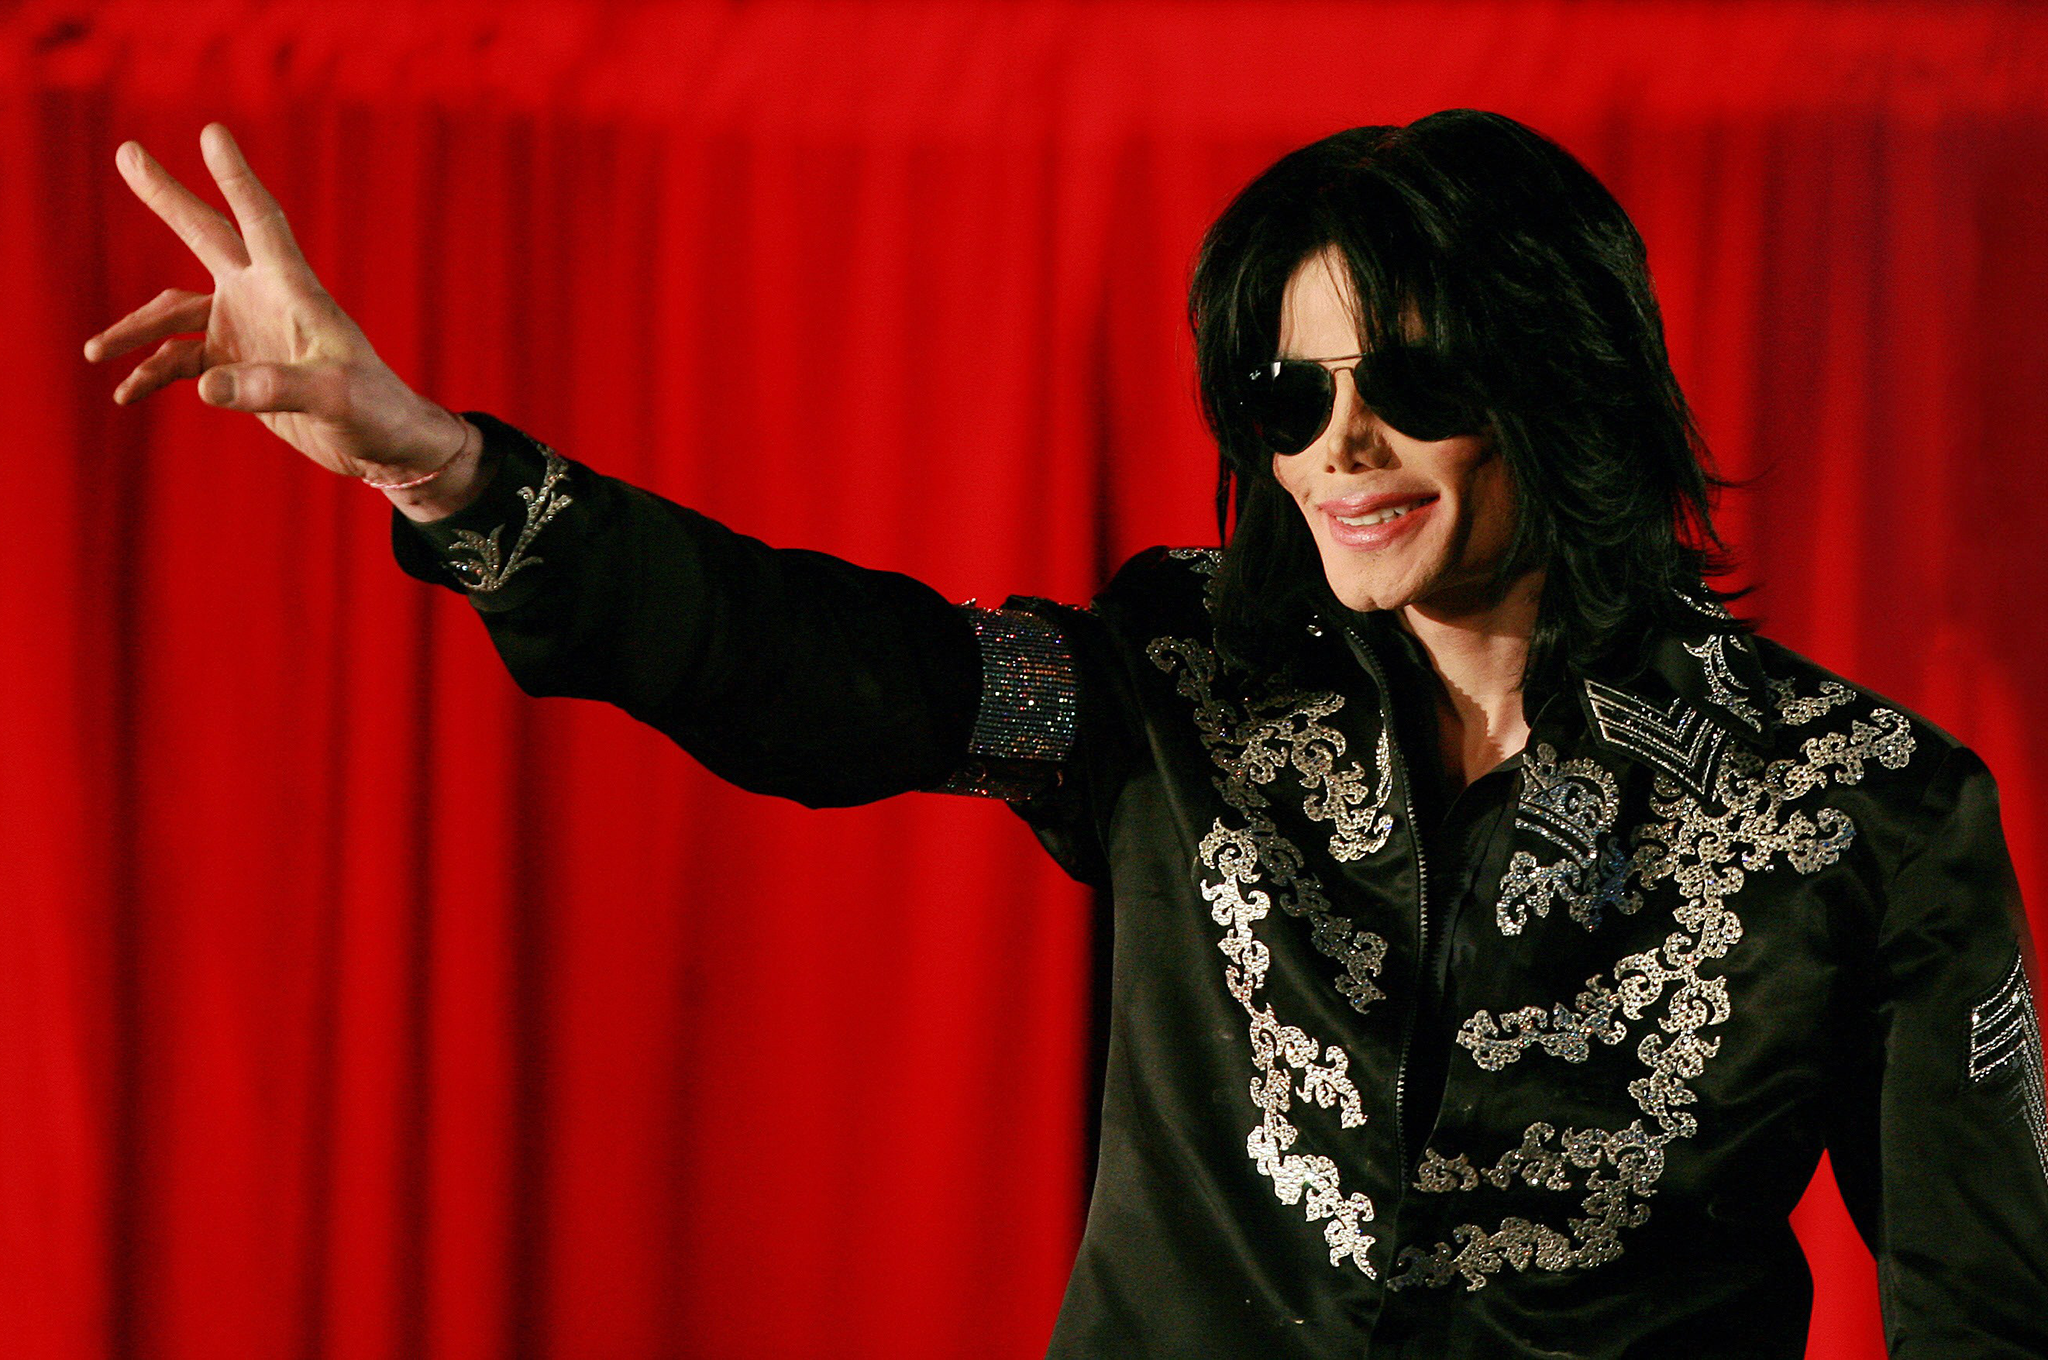 Michael Jackson addresses a press conference at the O2 arena in London, 2009